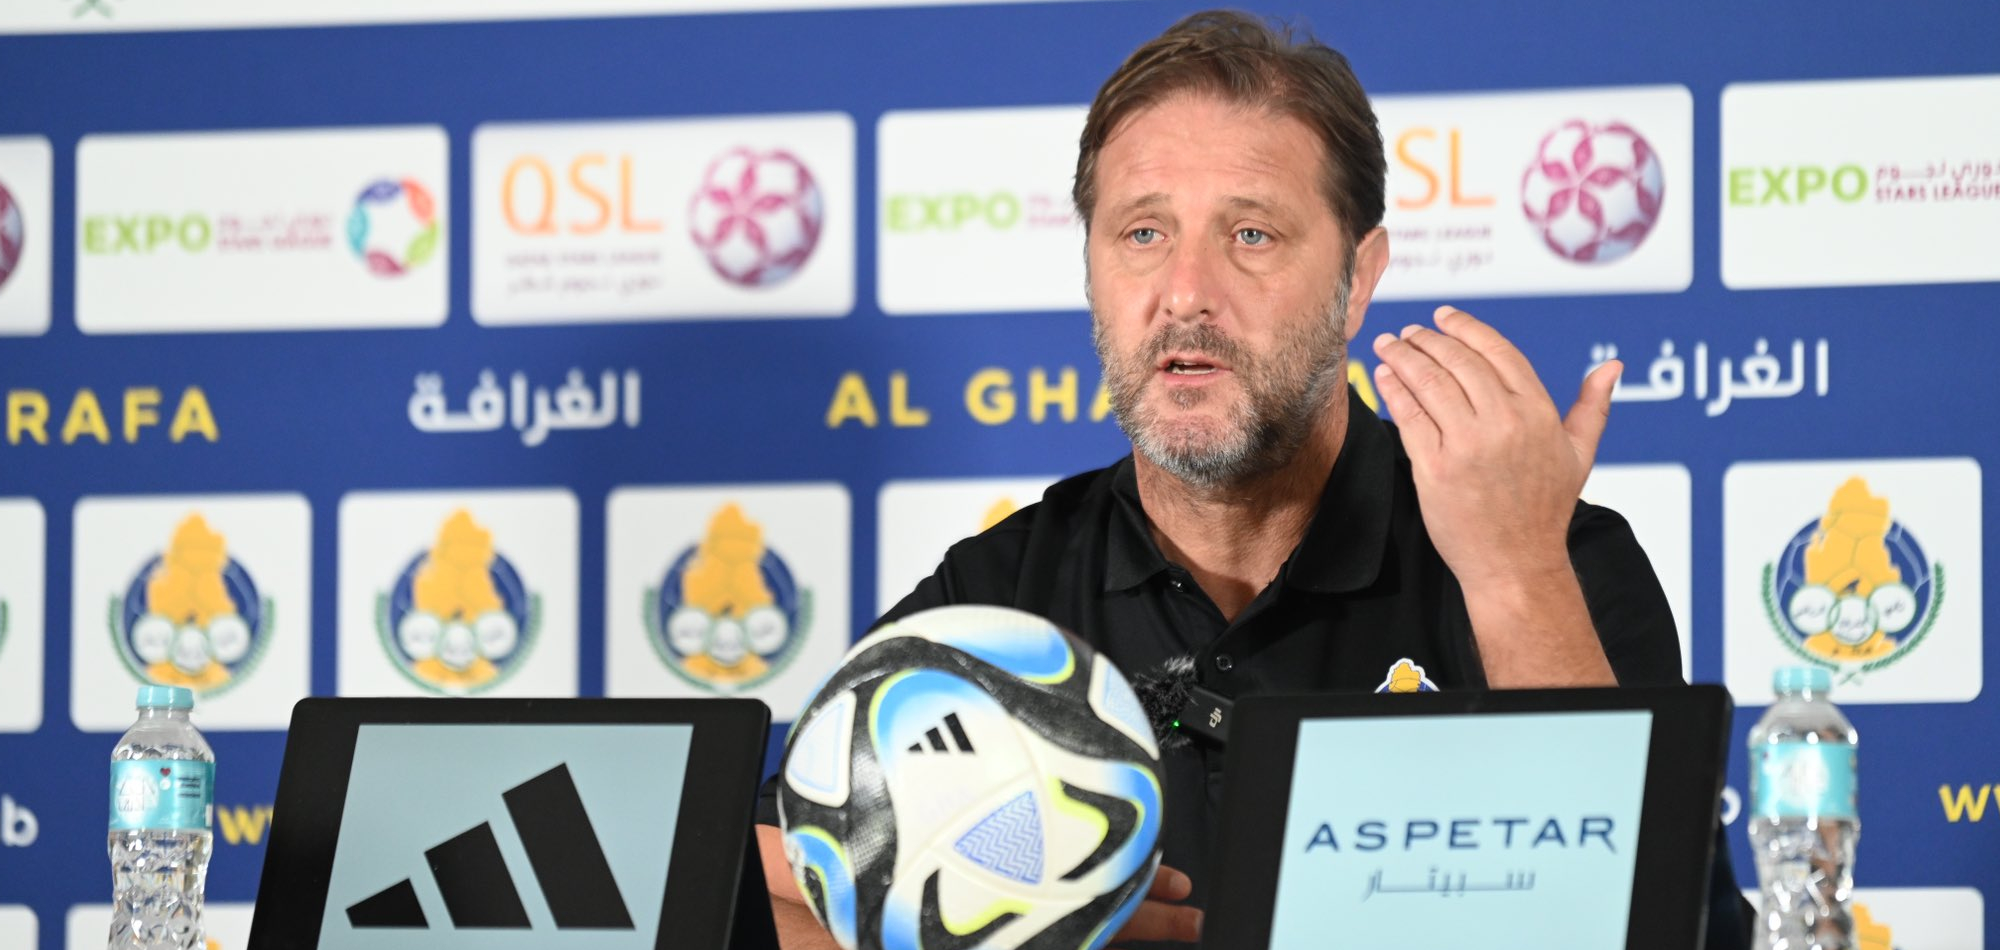 Atmosphere positive and morale high, we’re preparing well to face Muaither: Al Gharafa coach Martins